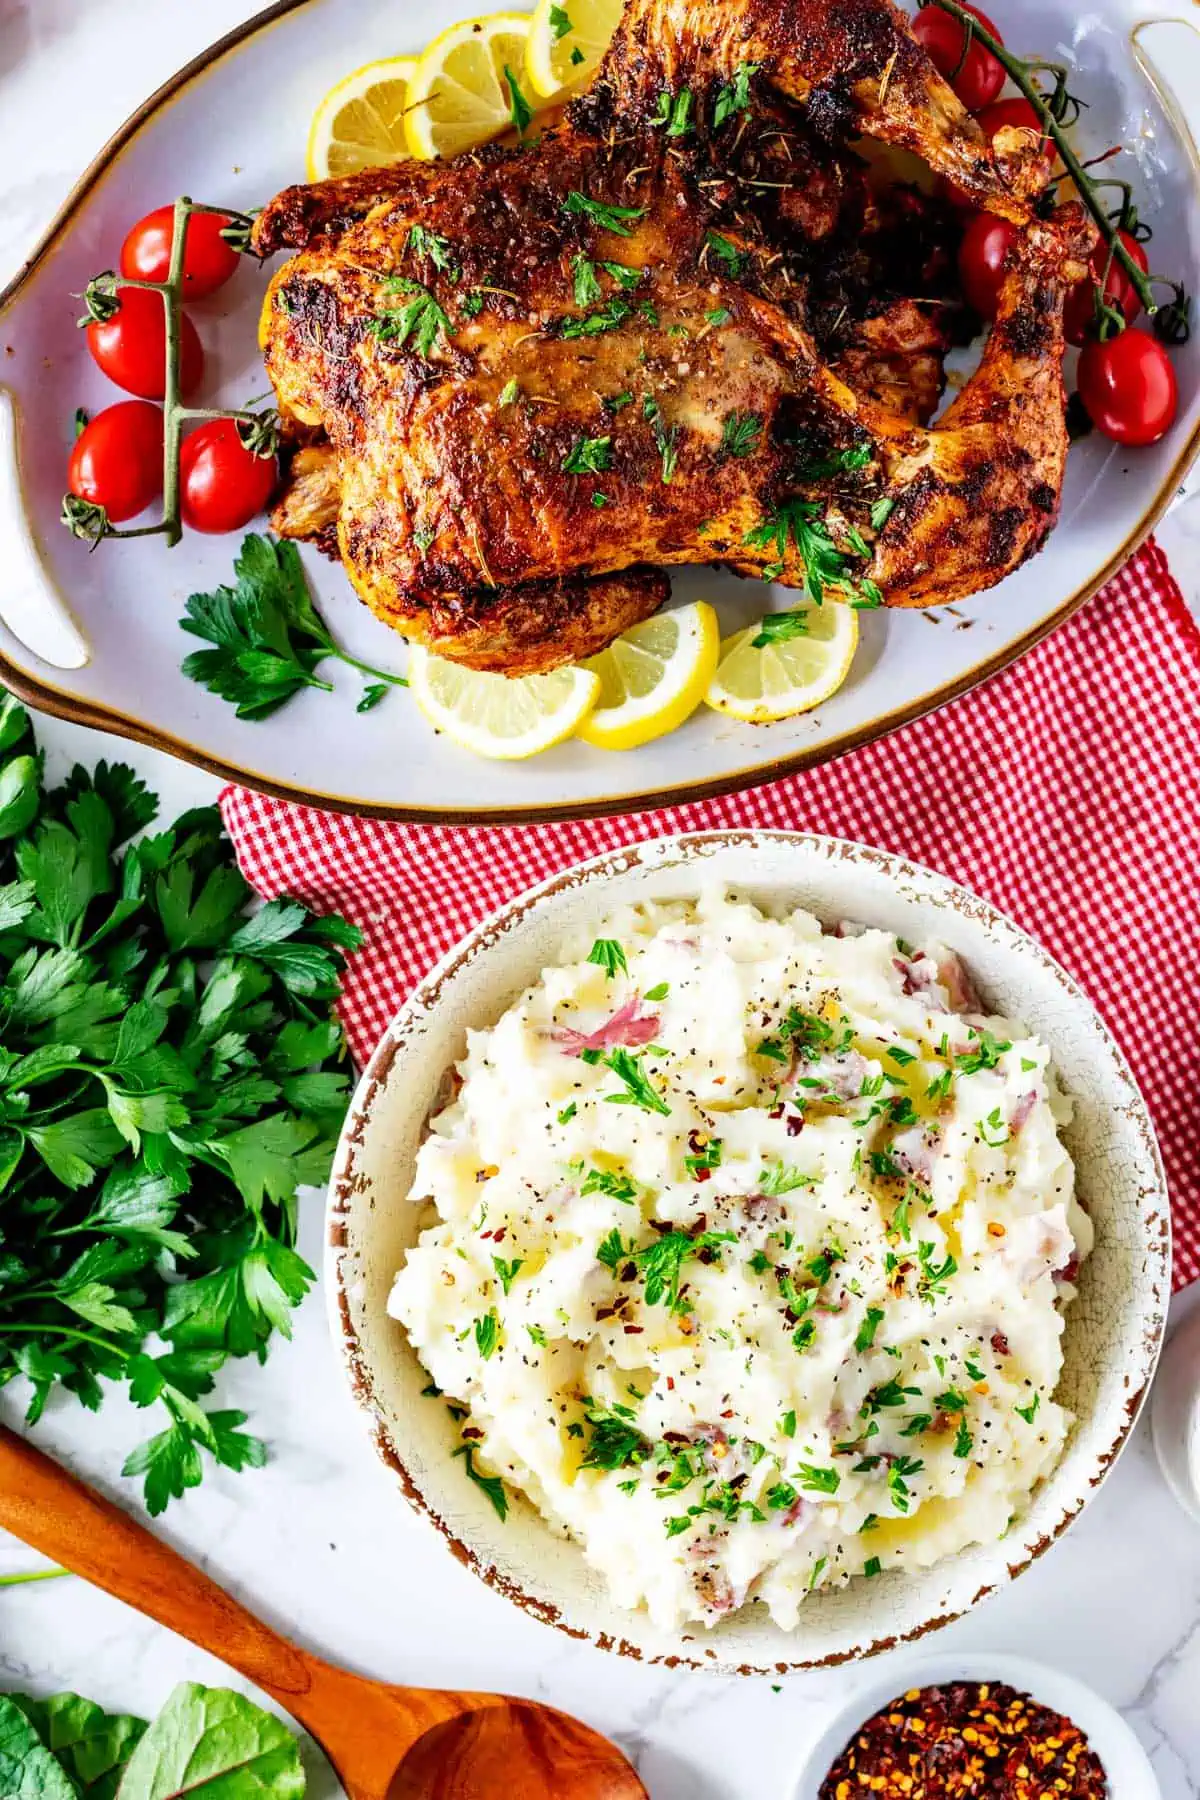 Photo of a bowl of garlic mashed potatoes sitting in front of a roasted chicken.